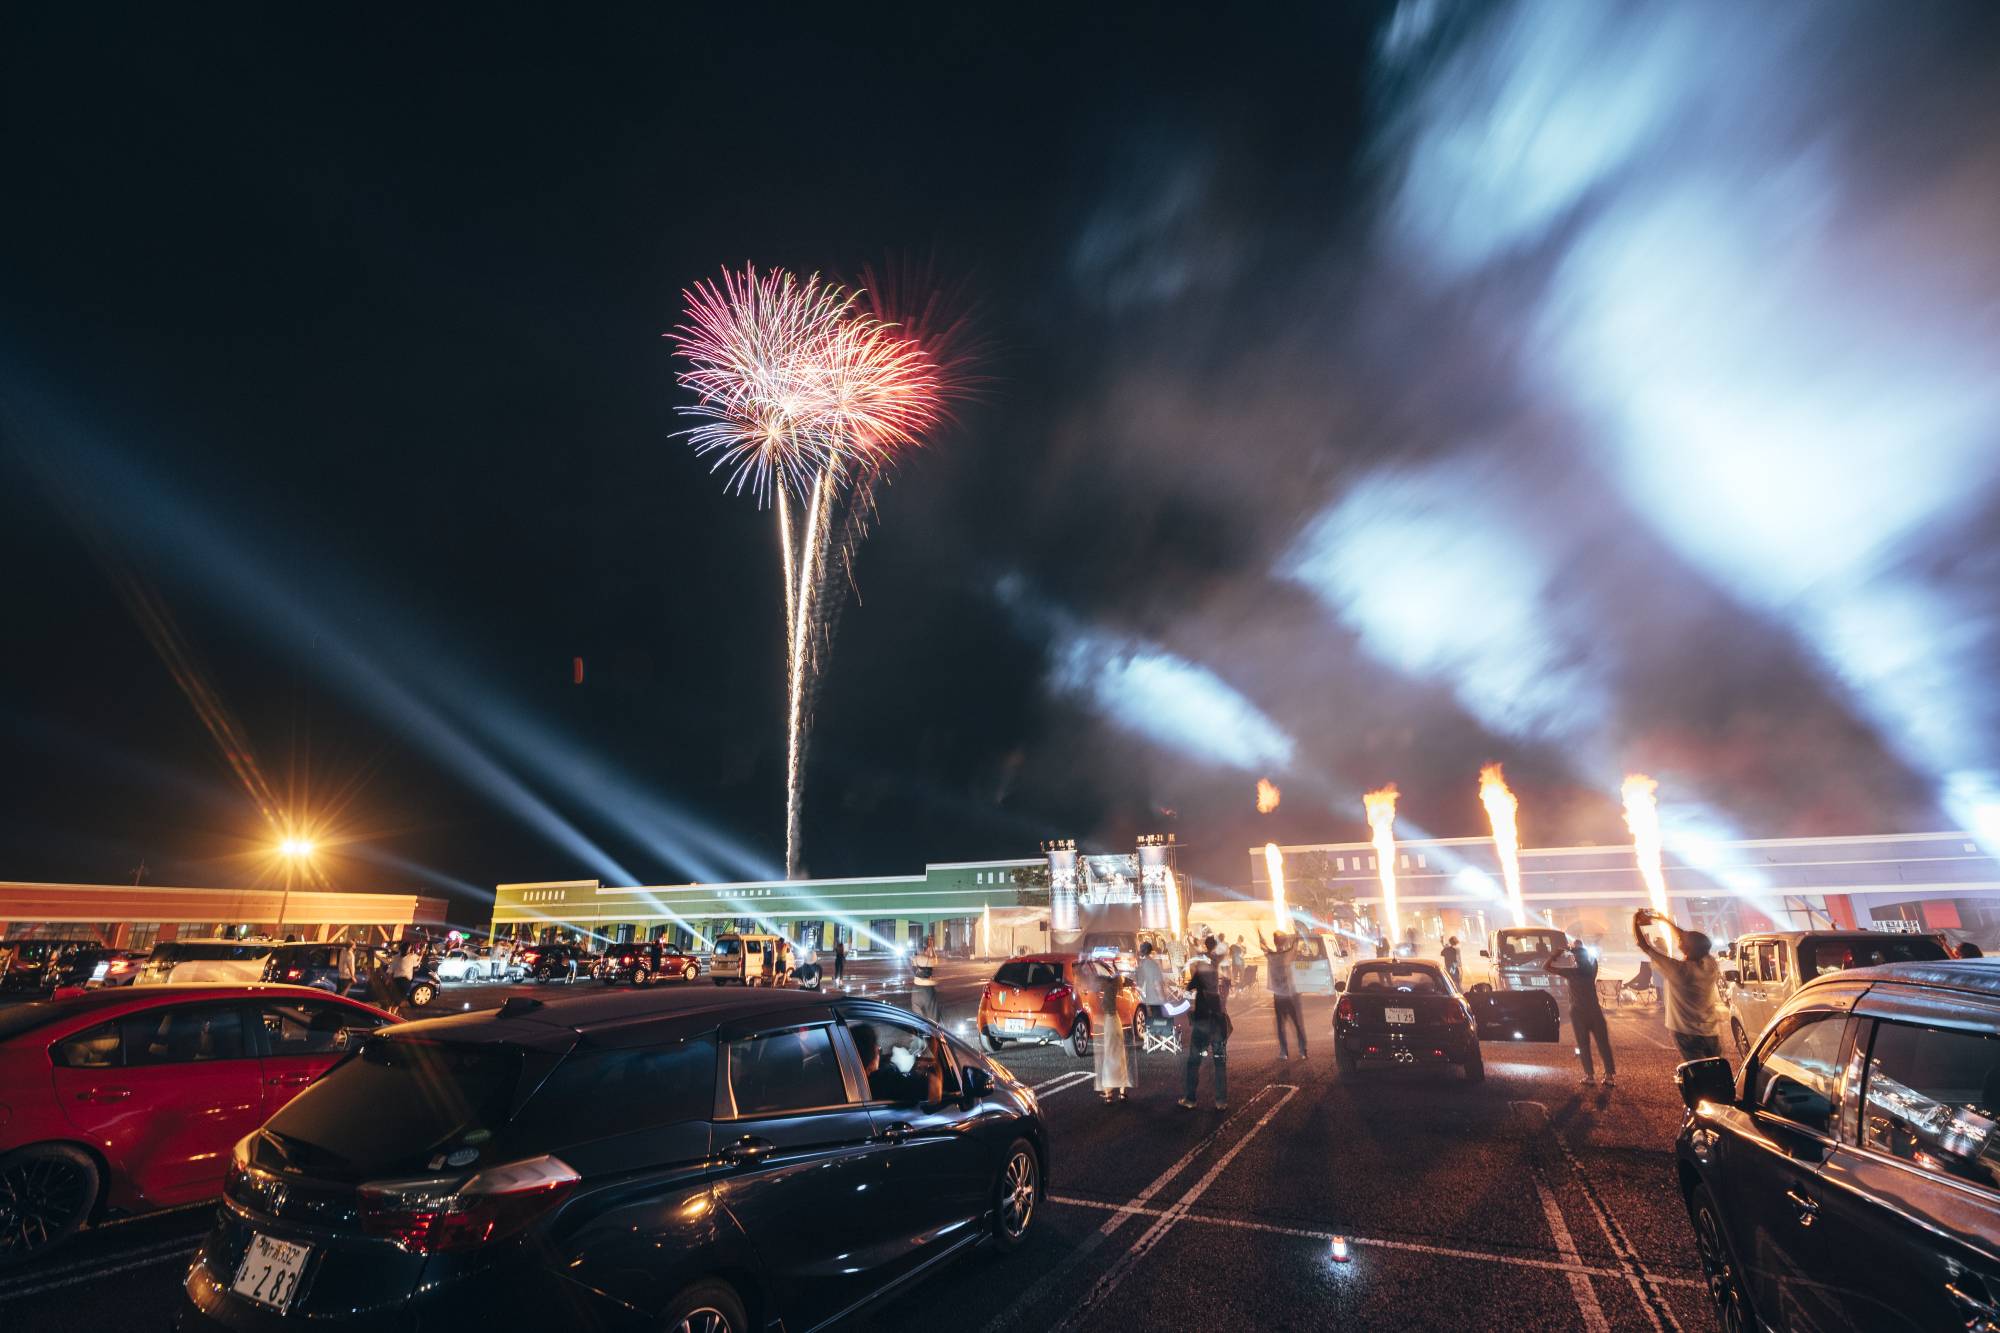 Joyride: The Drive In Fes in Nagara, Chiba Prefecture, allowed concertgoers to enjoy live music and fireworks from the safety of their vehicles. | PHOTO COURTESY OF AFRO & CO. / KYODO